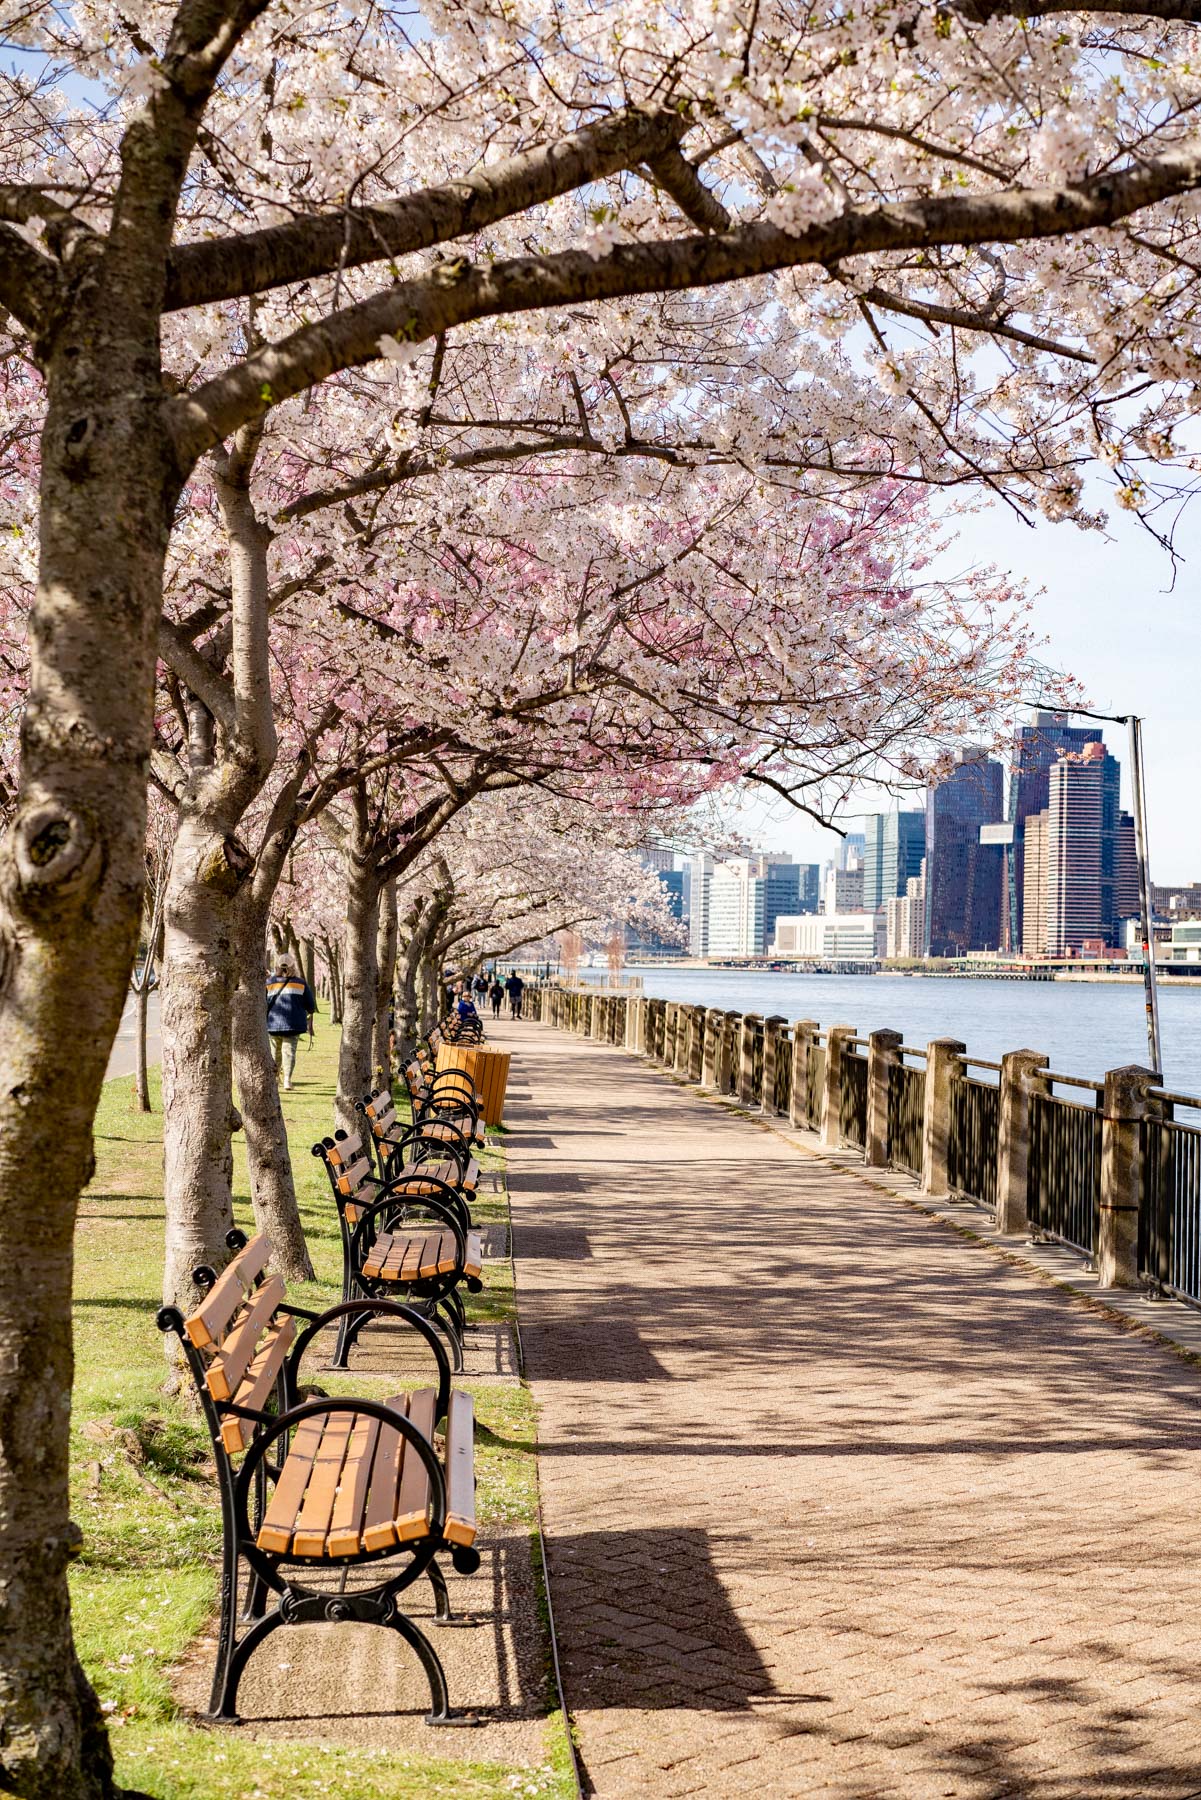 Roosevelt Island Cherry Blossoms in spring